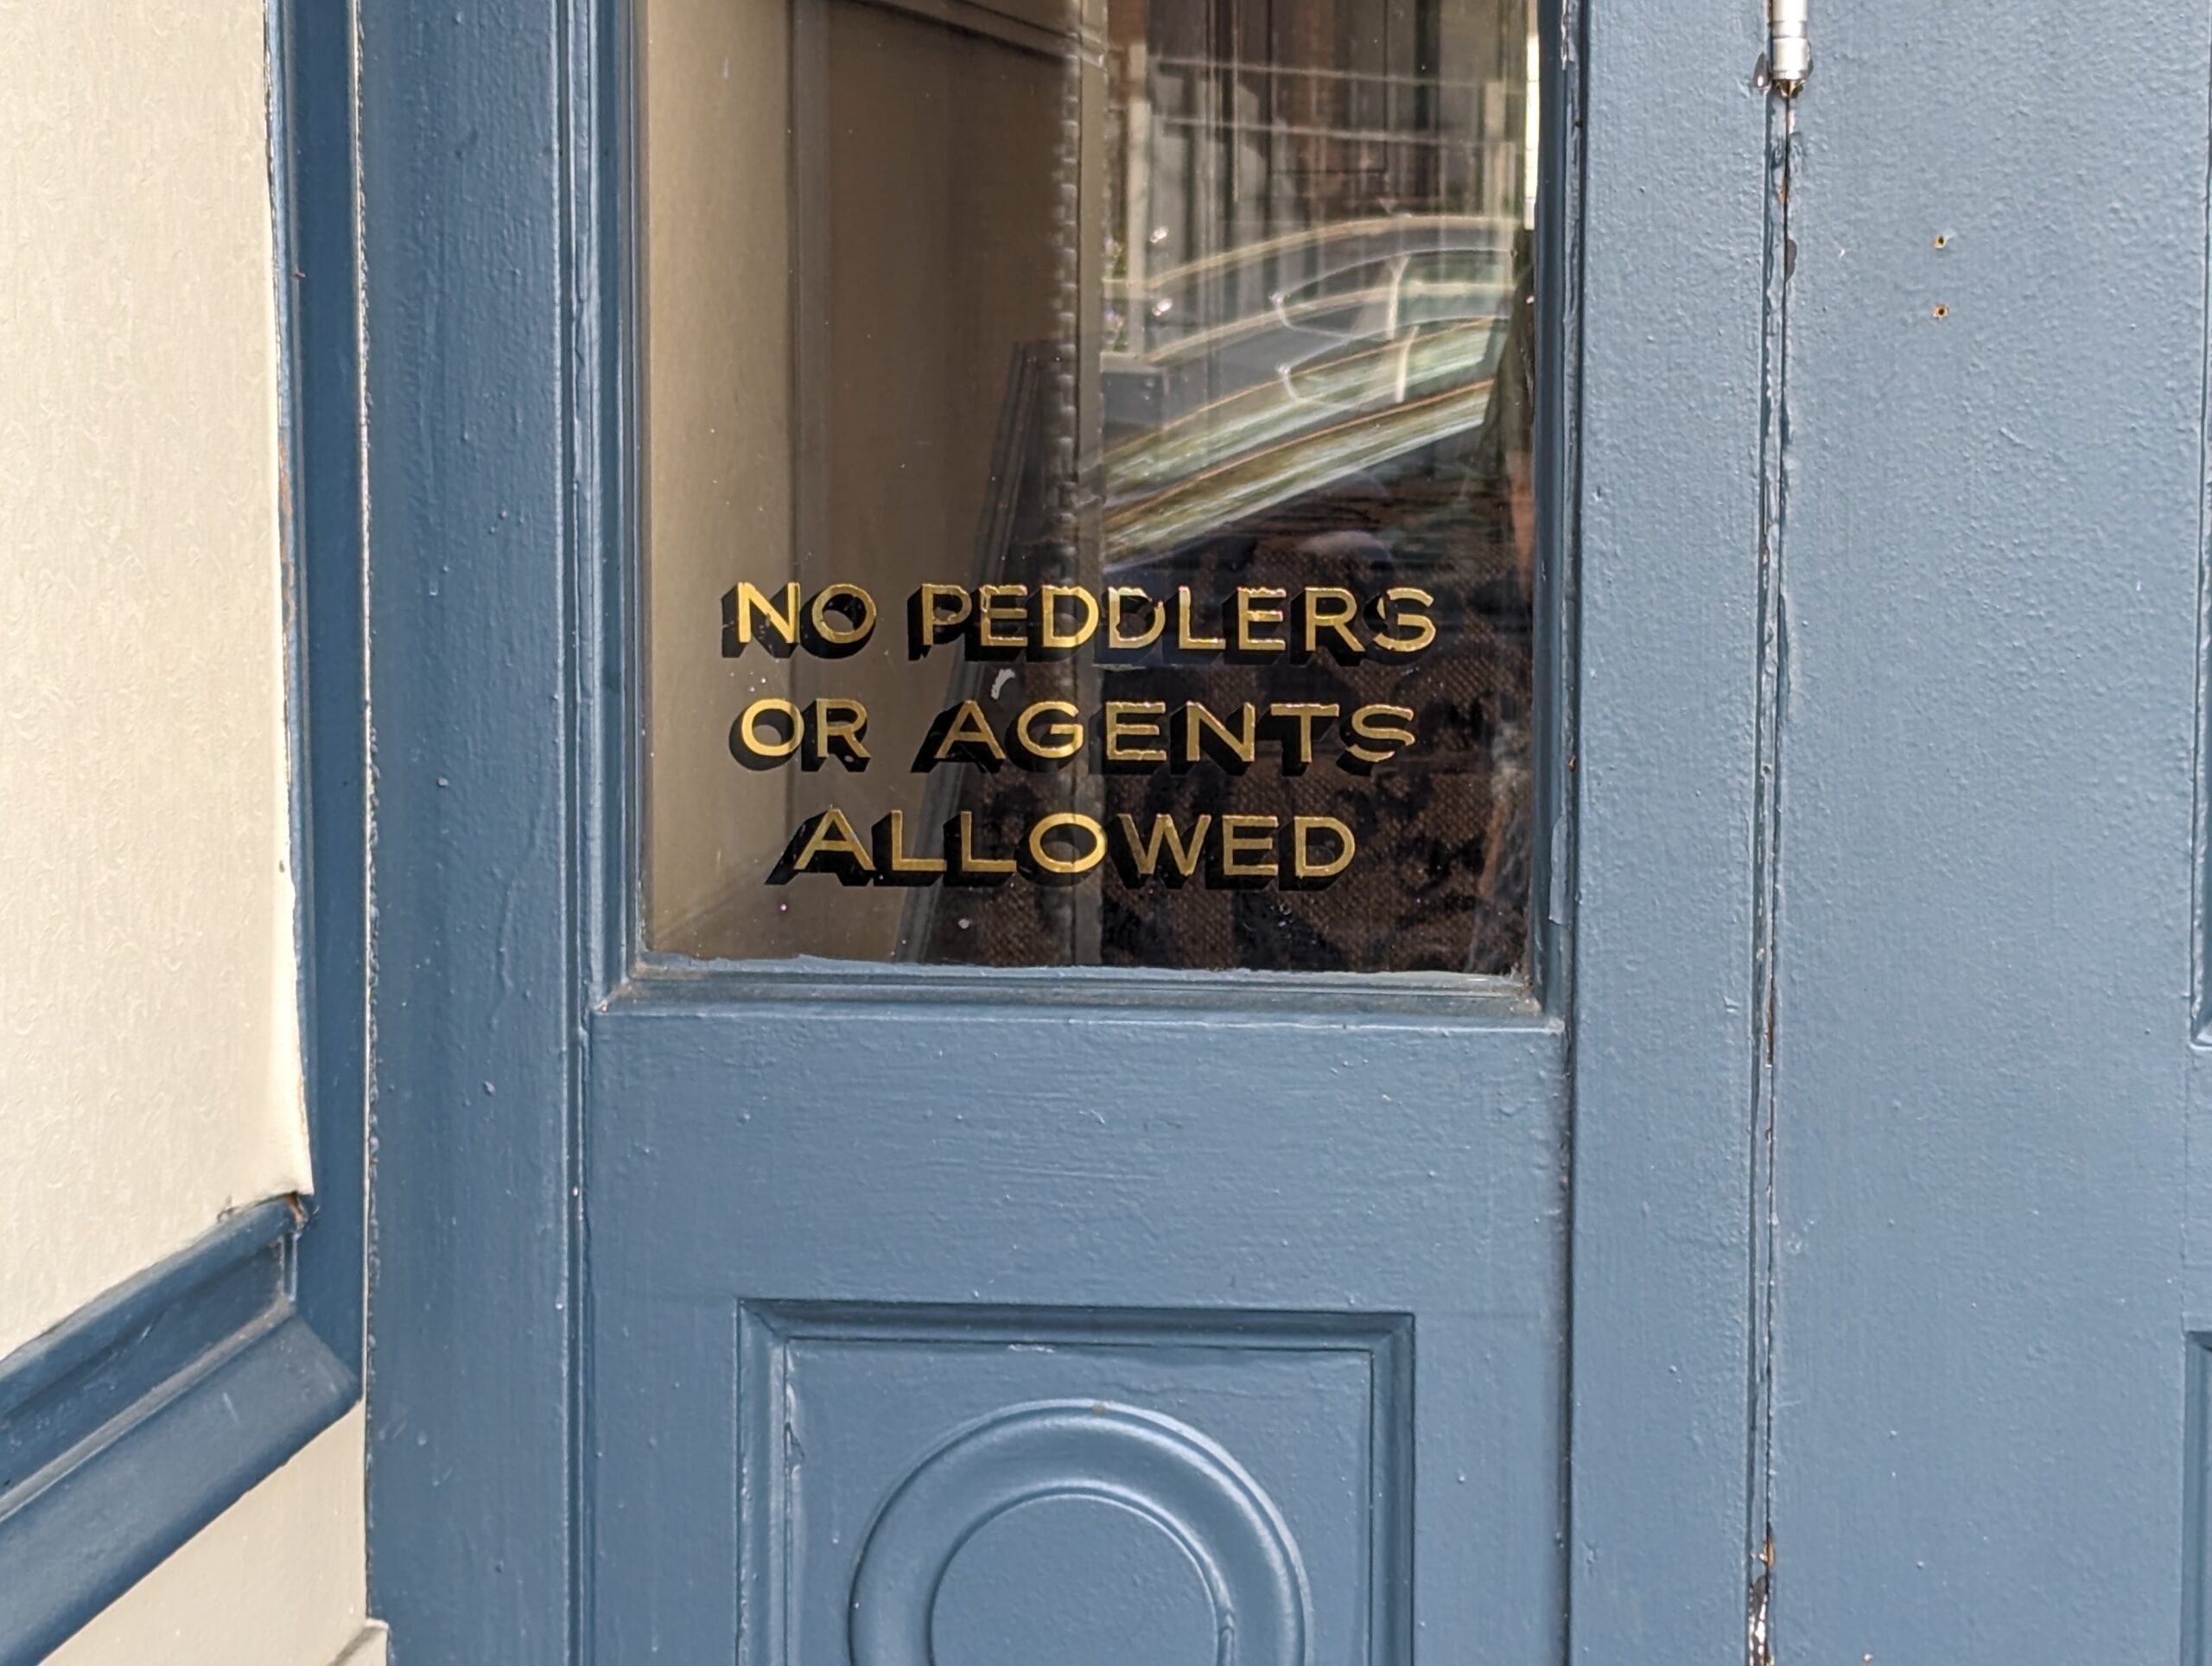 Text printed in a window in gold font that says "No Peddlers or Agents Allowed."